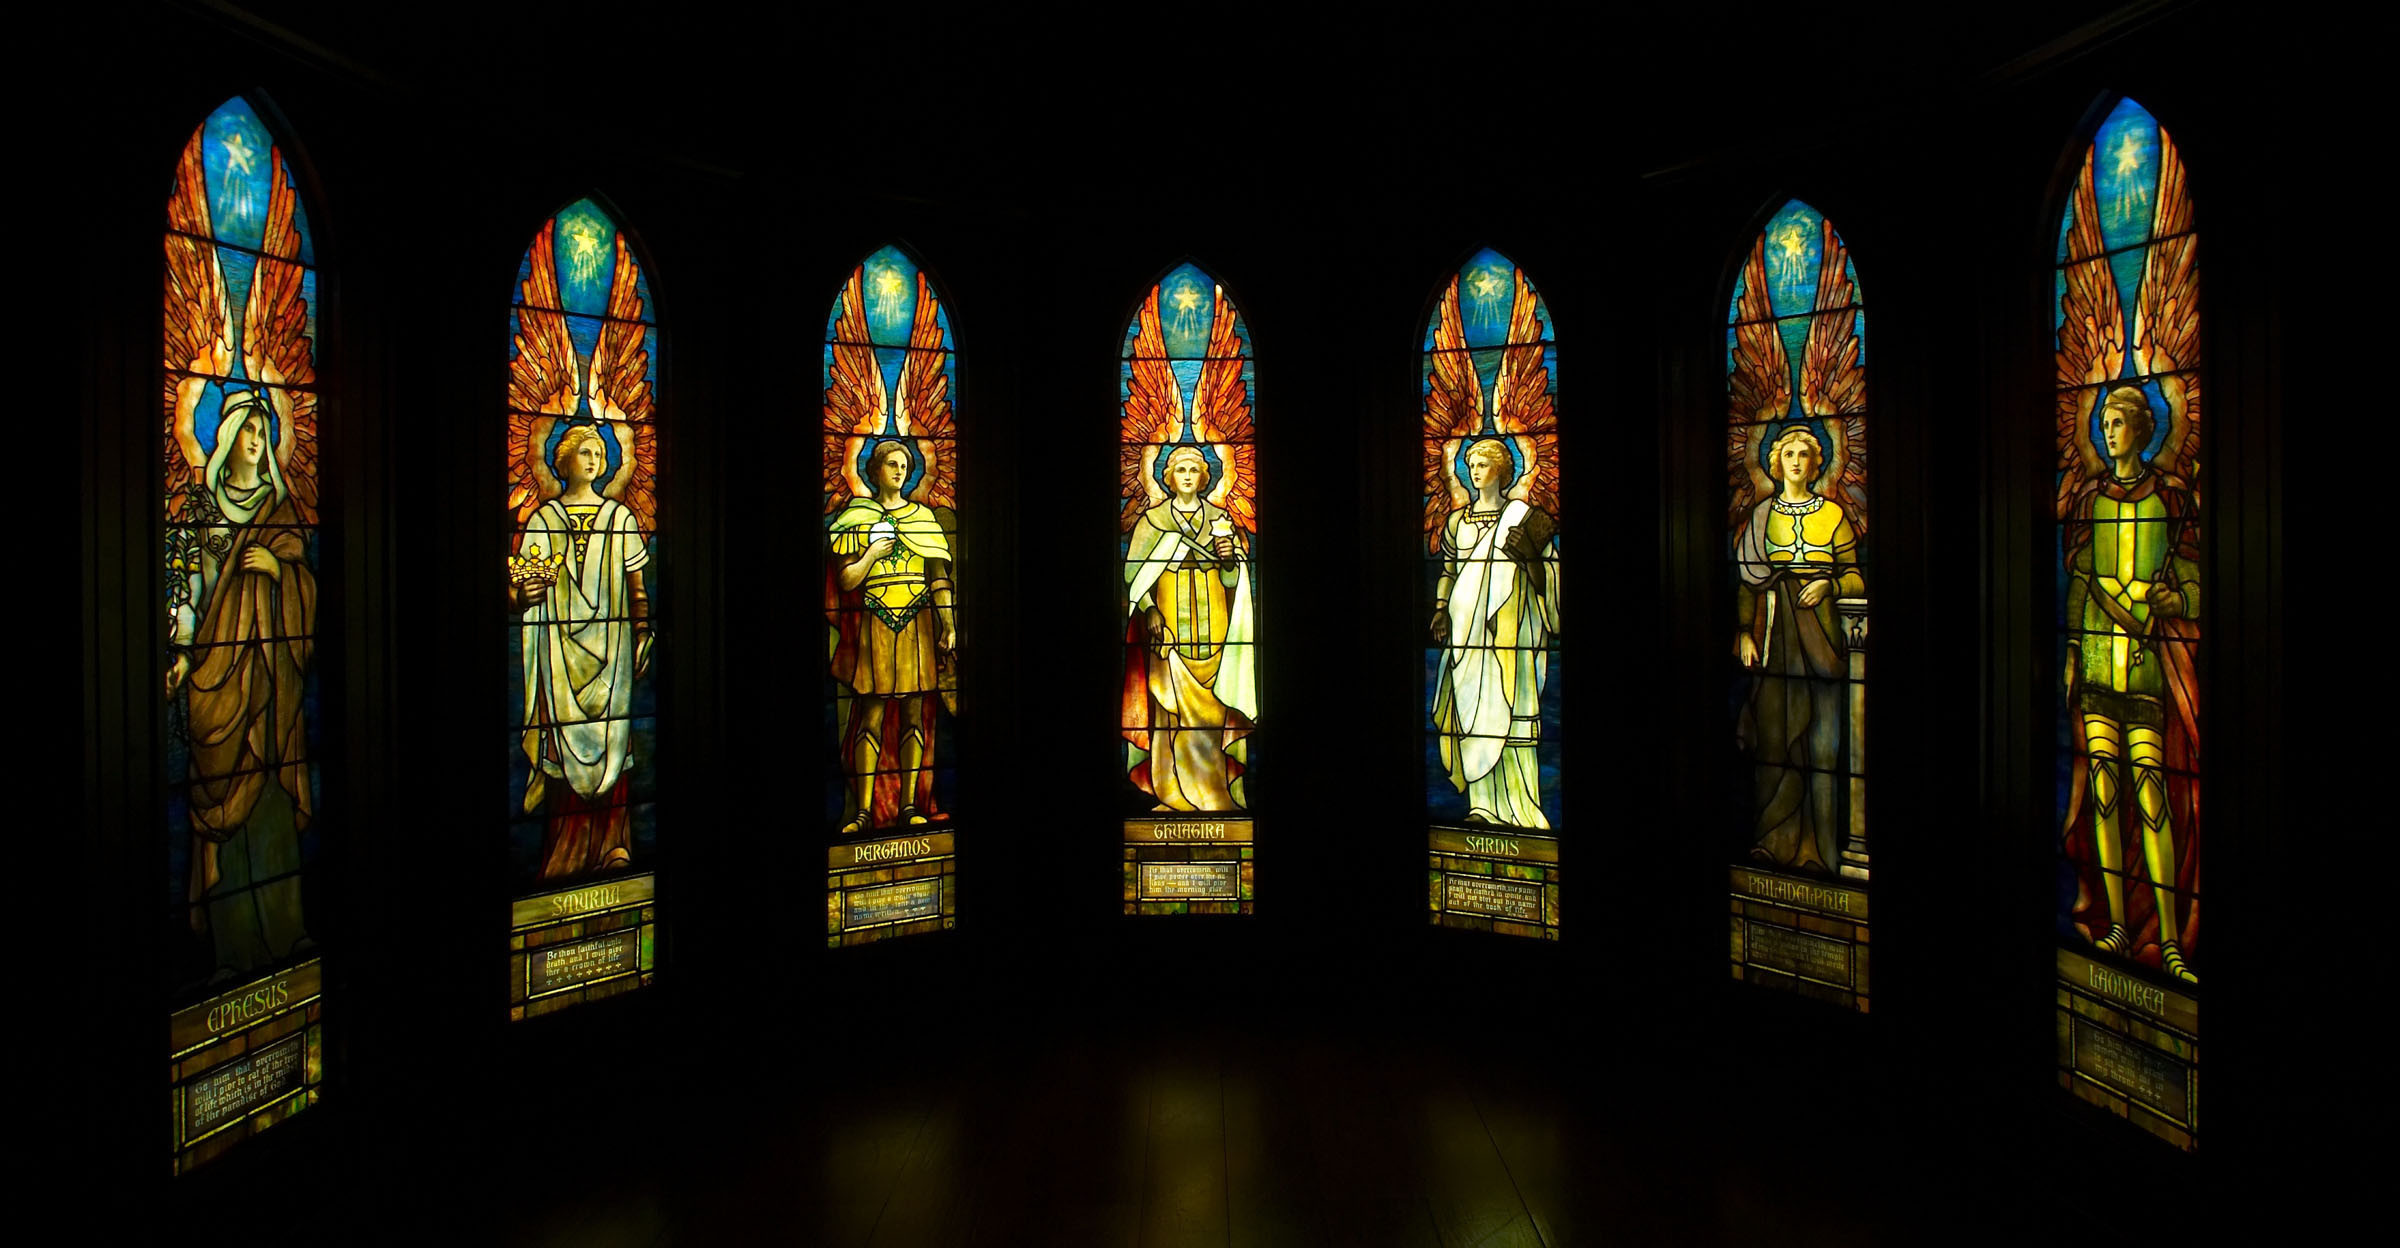 2400x1248 Stained glass art window religion f wallpaper |  | 182572 |  WallpaperUP